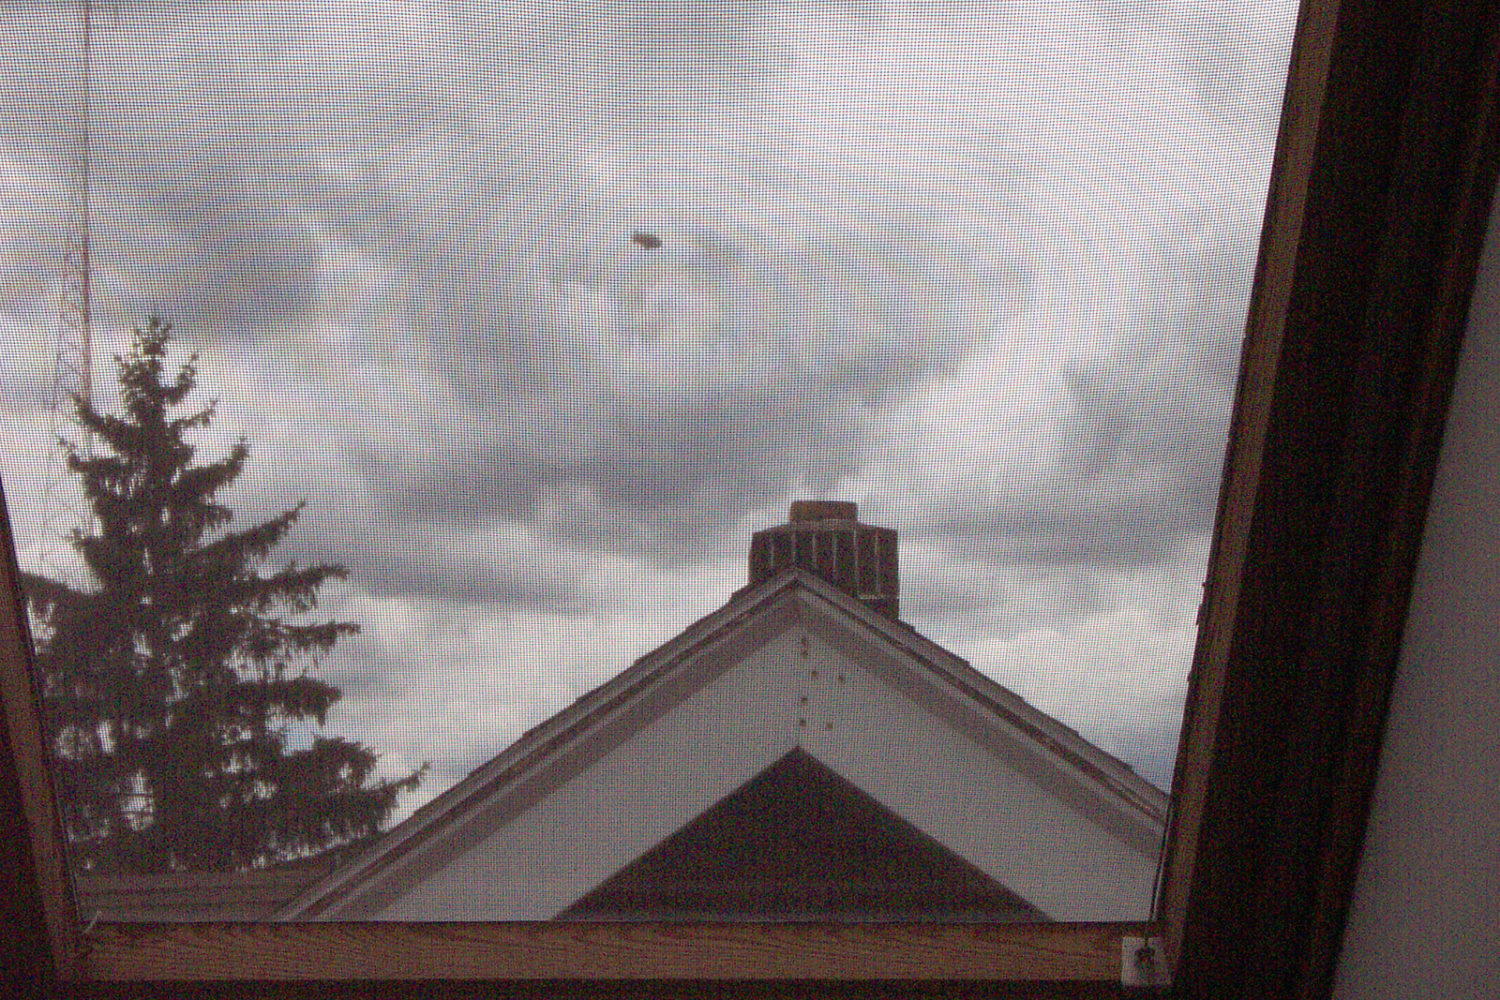 Blimp over Sparky's house in 2002